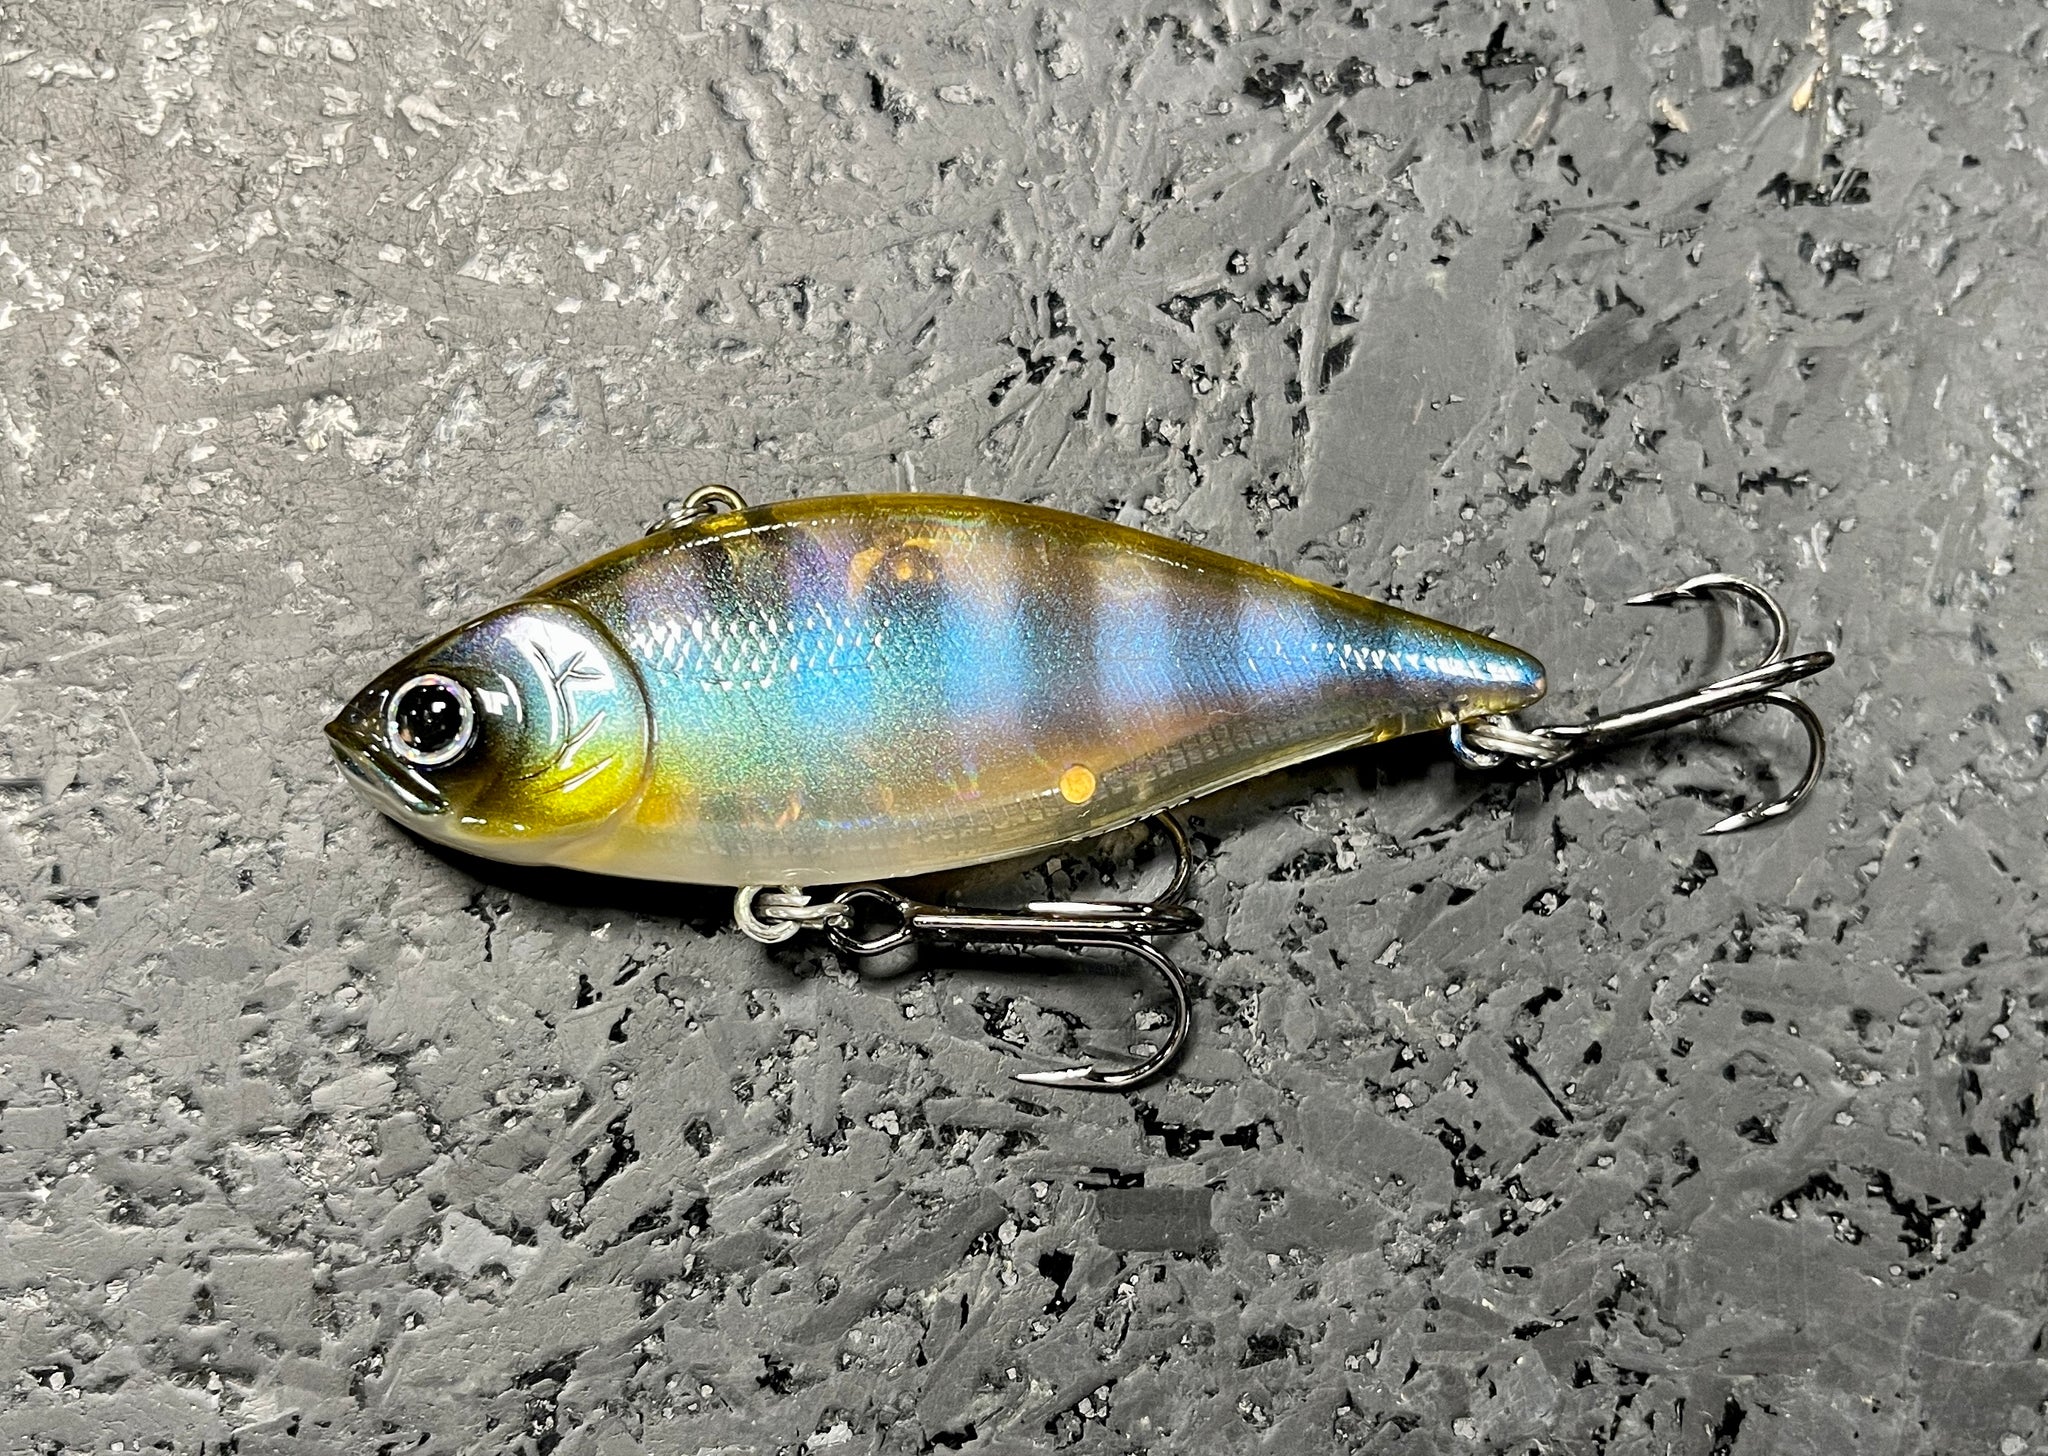 Lipless Cranking For Fall Bass With The Lucky Craft LV 200 